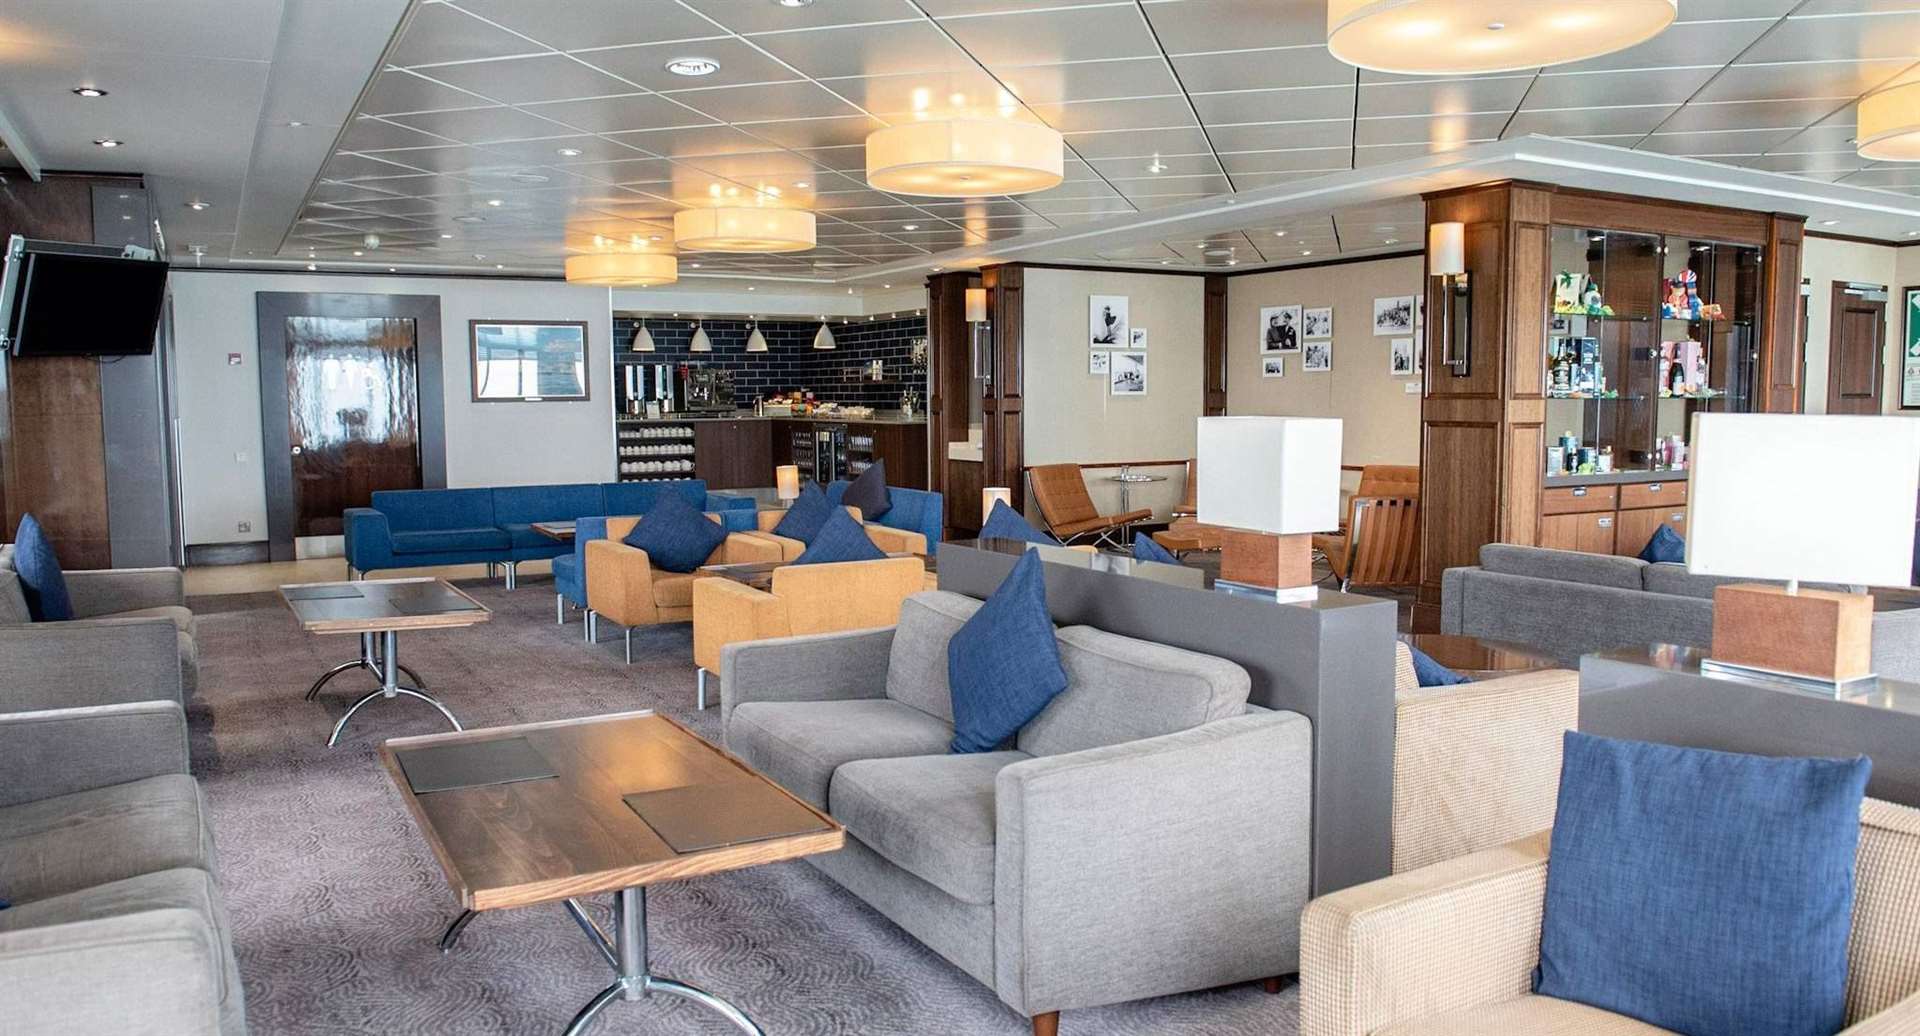 Club Lounge offers all the refreshments you need to arrive rested and refreshed at your destination.